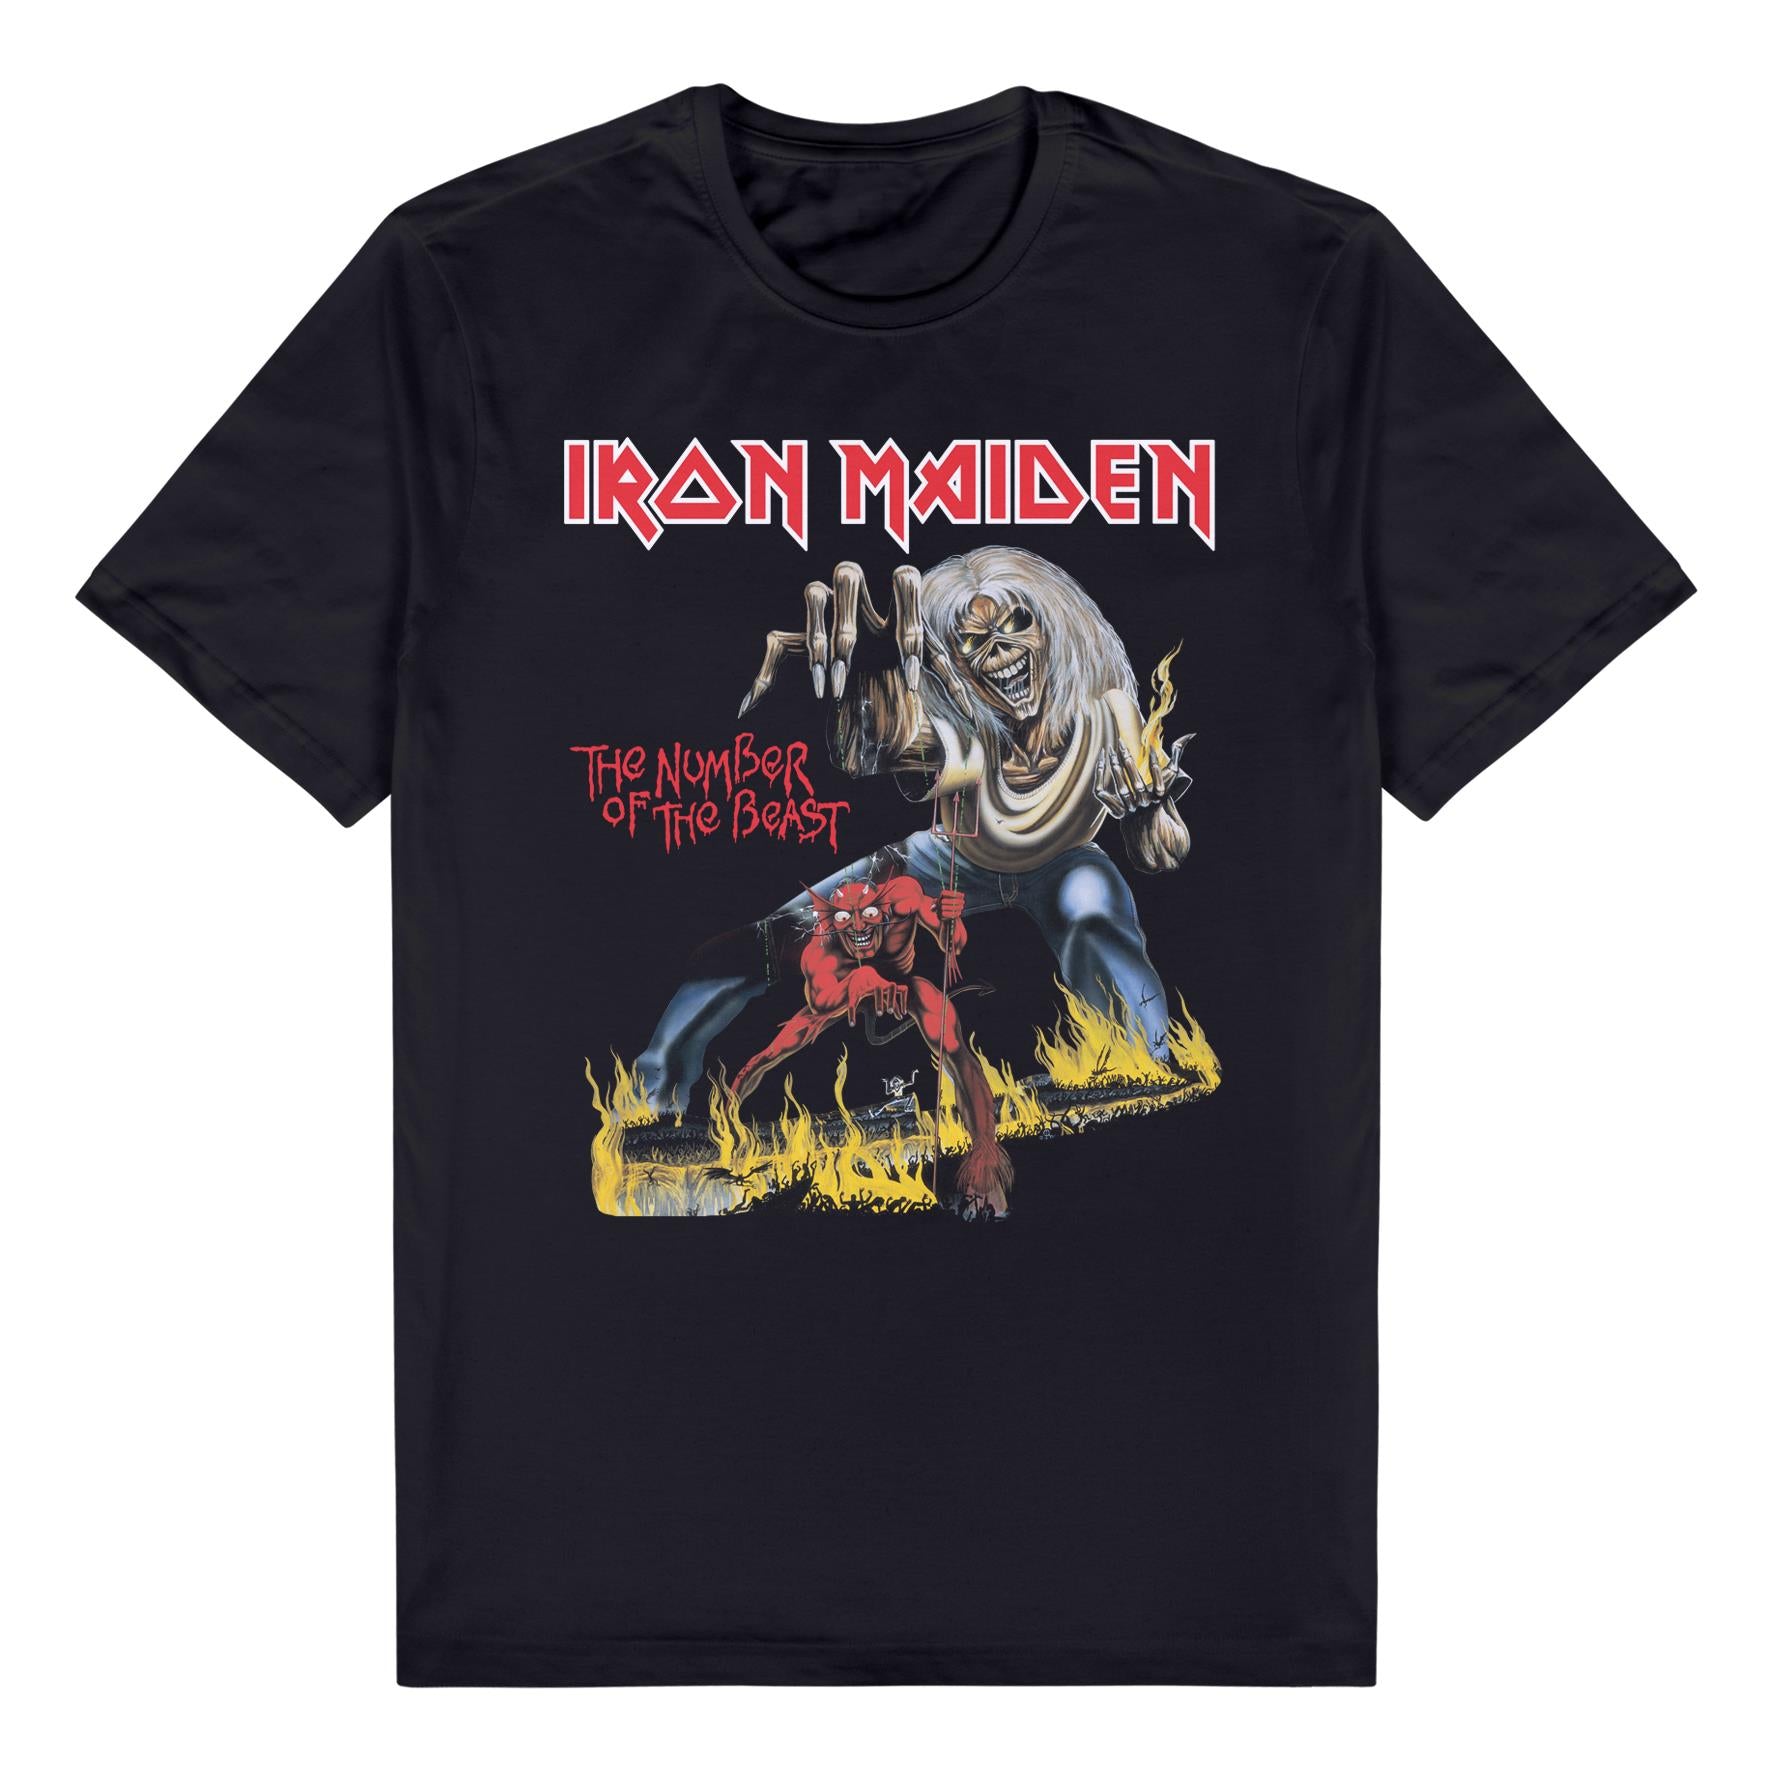 iron maiden - the number of the beast t-shirt